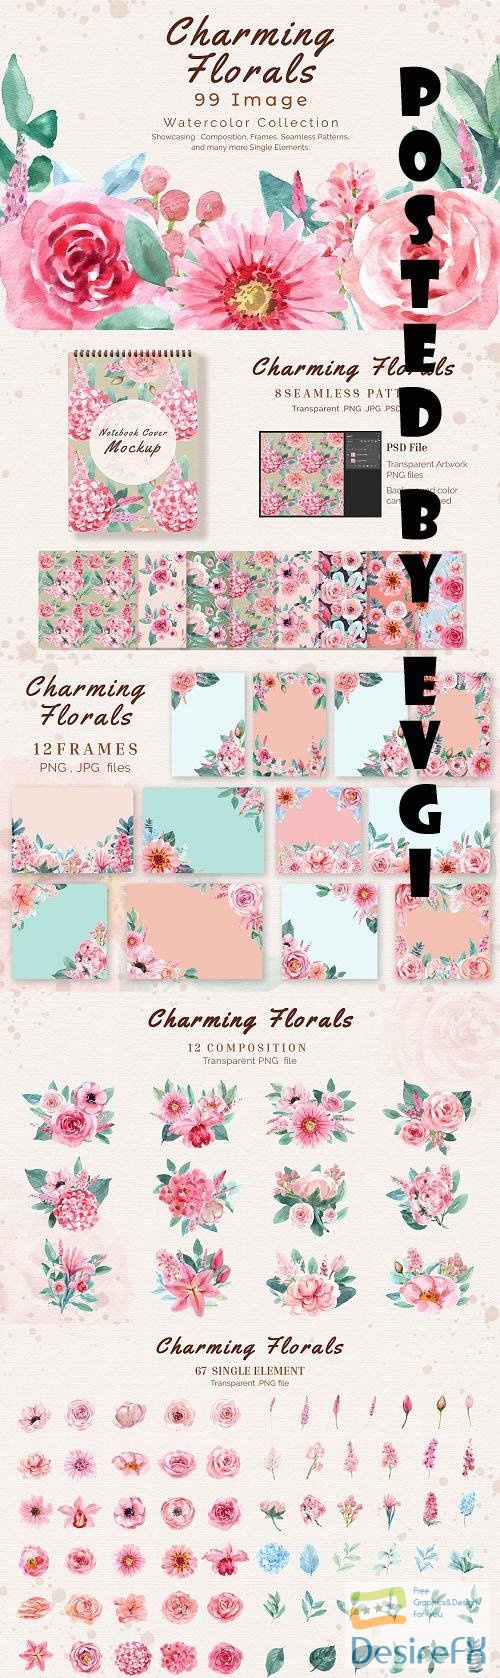 Charming Flowers of wedding watercolor - 6298138